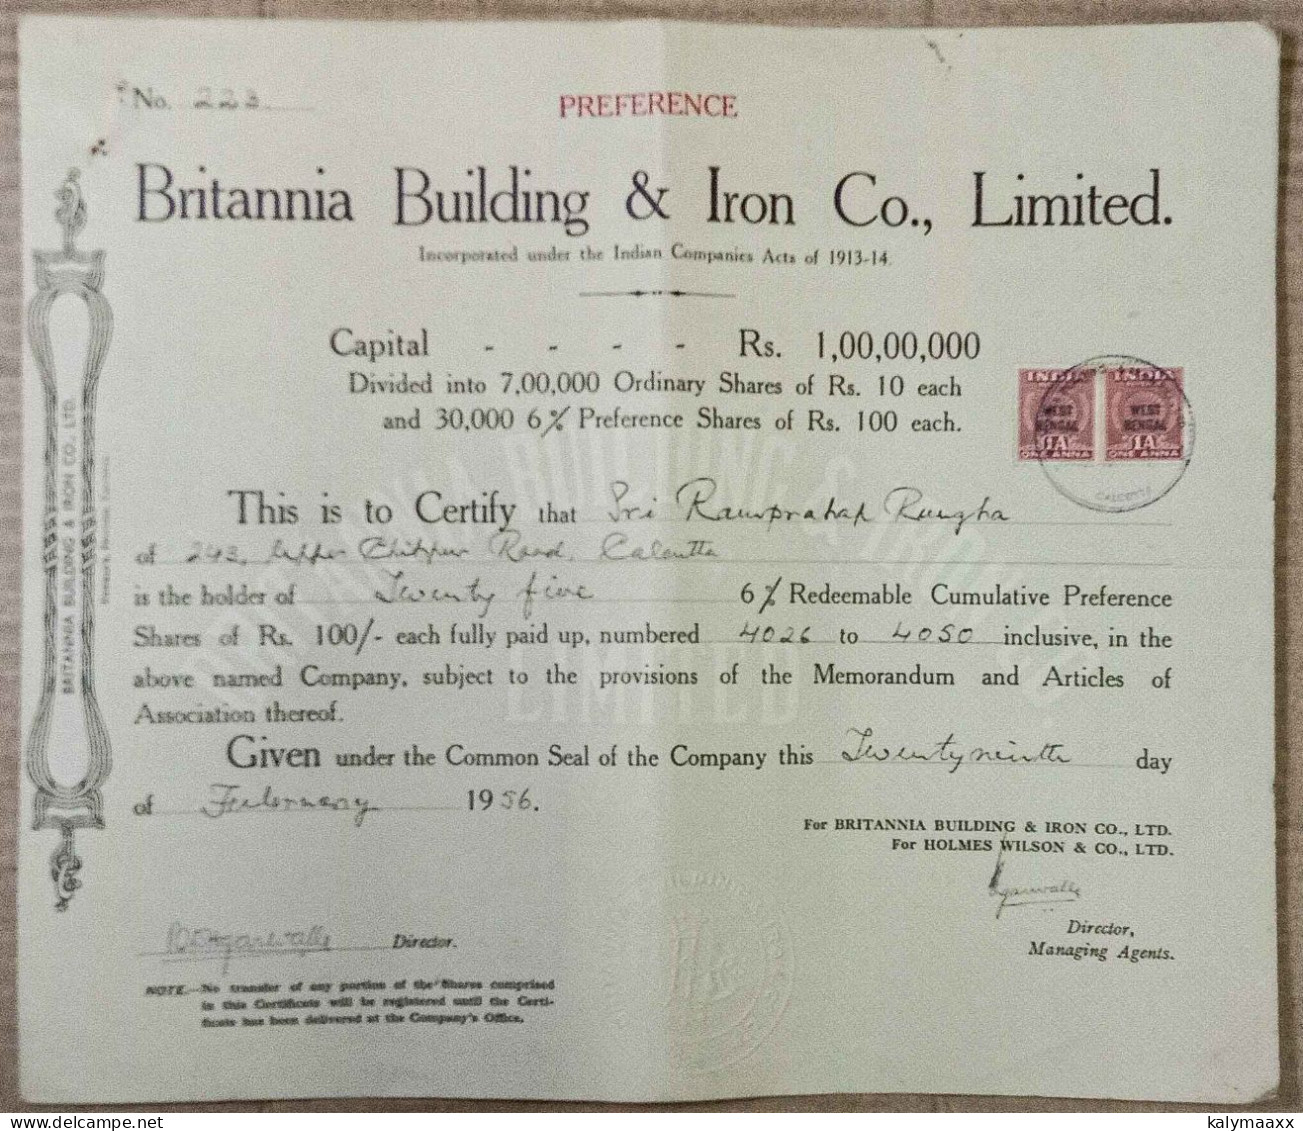 BRITISH INDIA 1956 BRITANNIA BUILDING & IRON CO., LIMITED.....PREFERENCE SHARE CERTIFICATE - Industrie